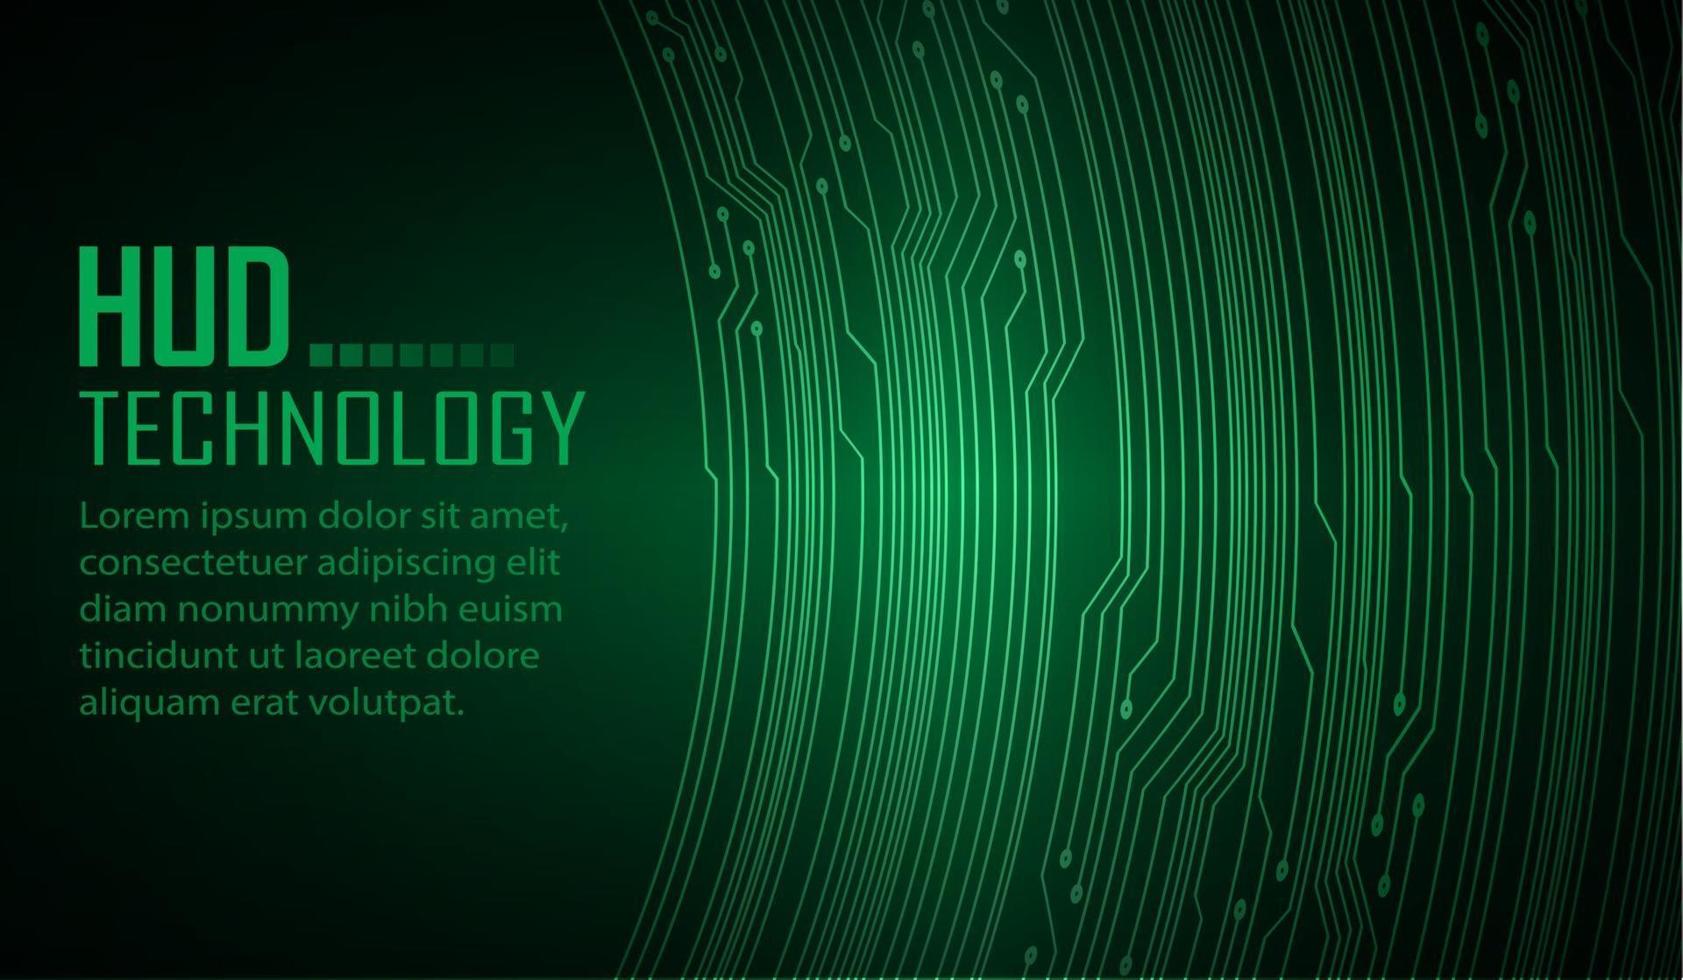 Printcyber circuit future technology concept background vector